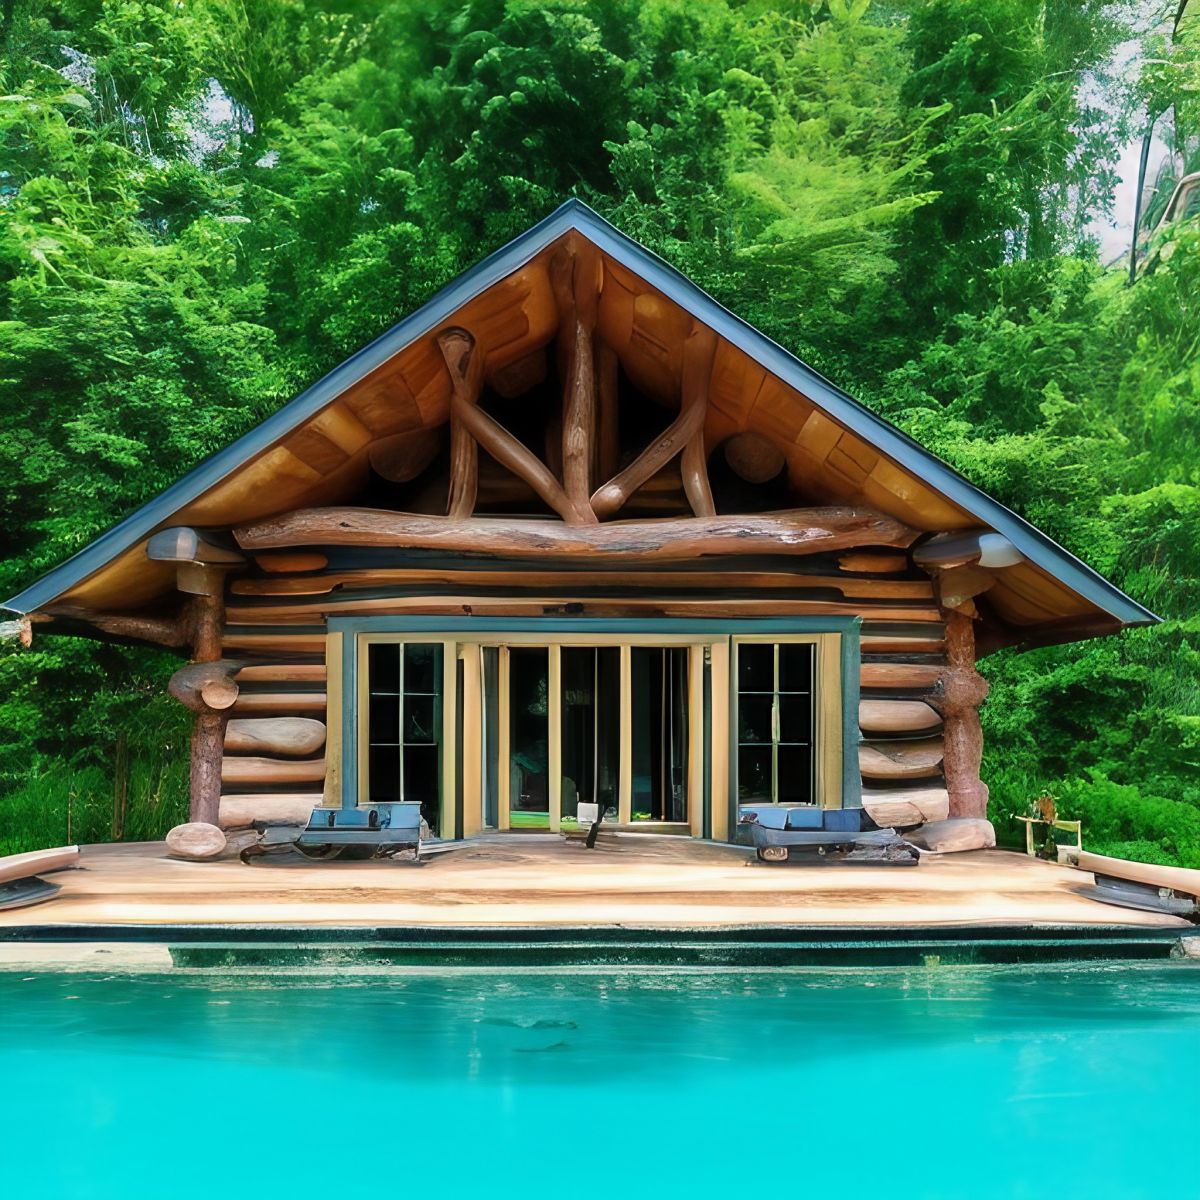 Log pool house with greenery in background